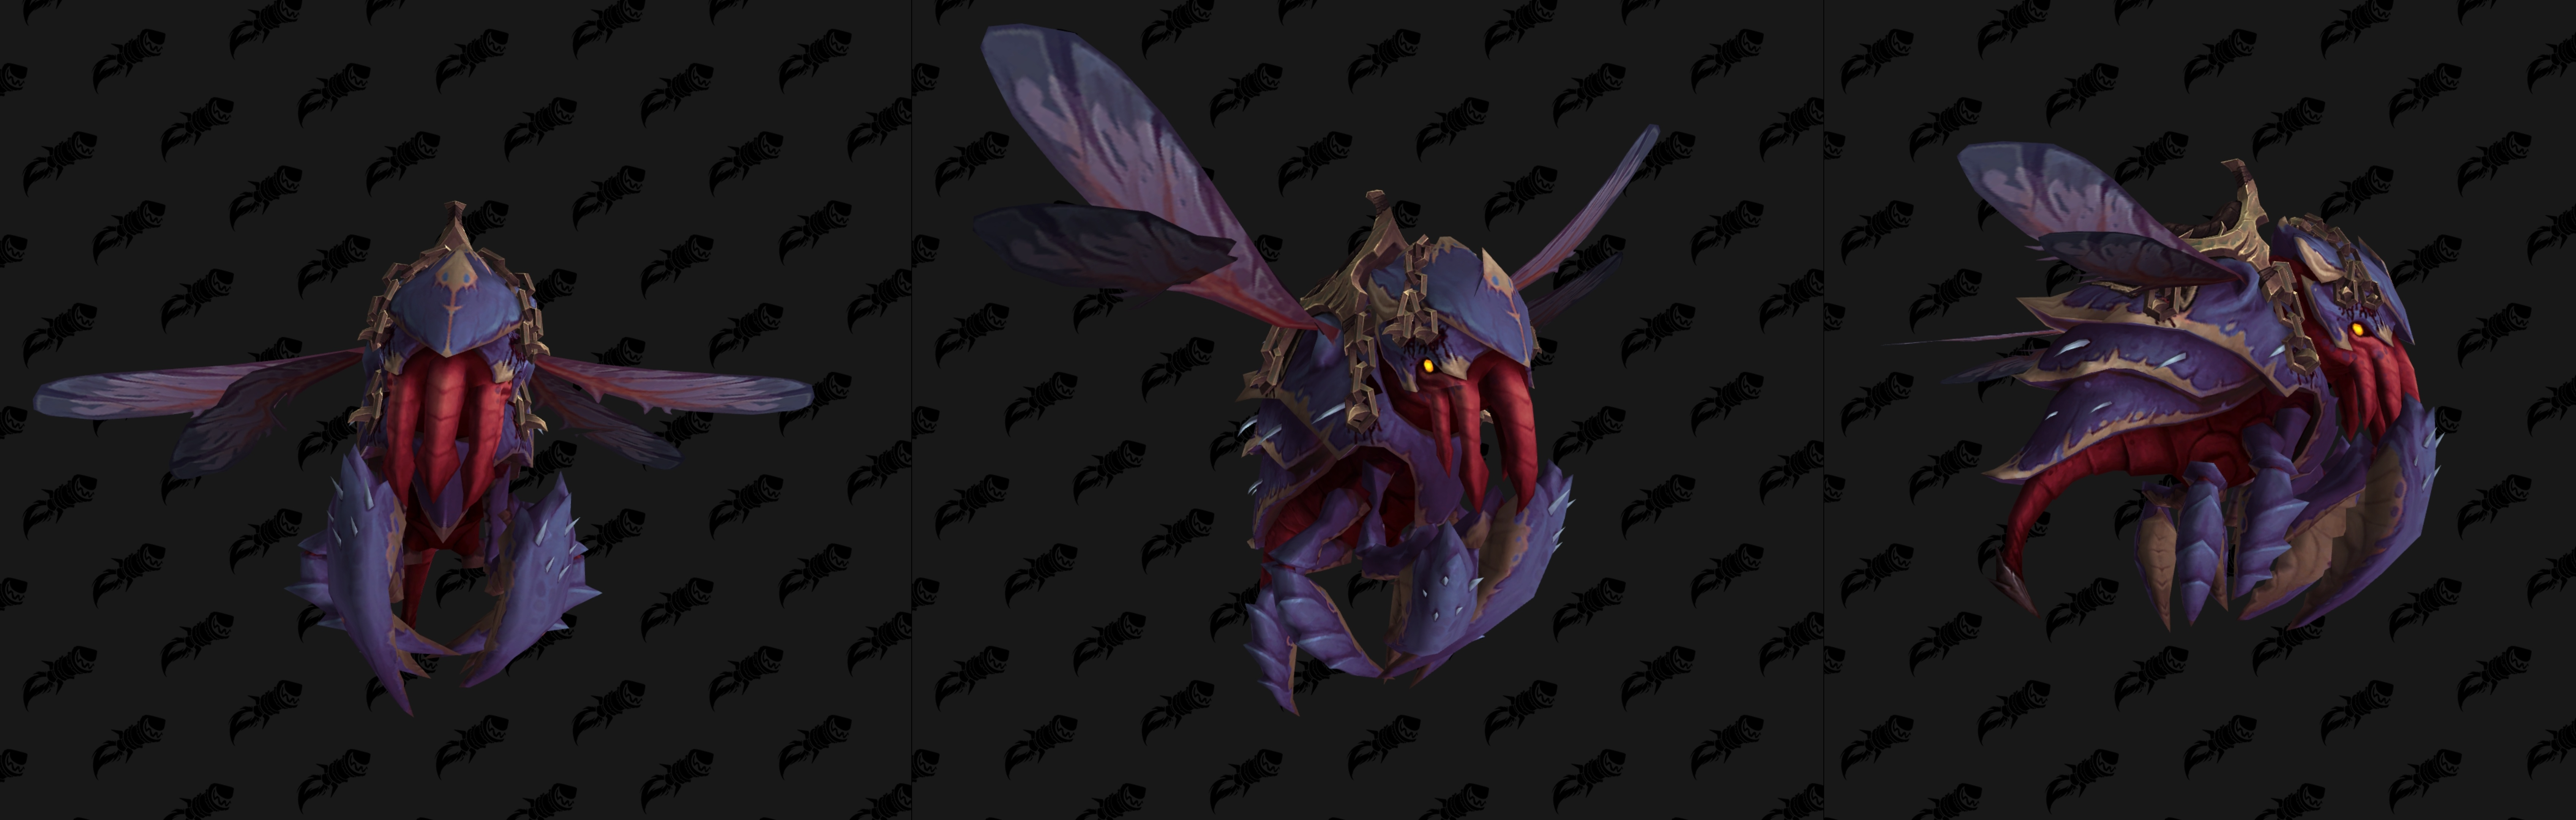 He To meditation Bat Obedient Drone - Mount from Taming Aqir Hatchling Friendship - Wowhead News